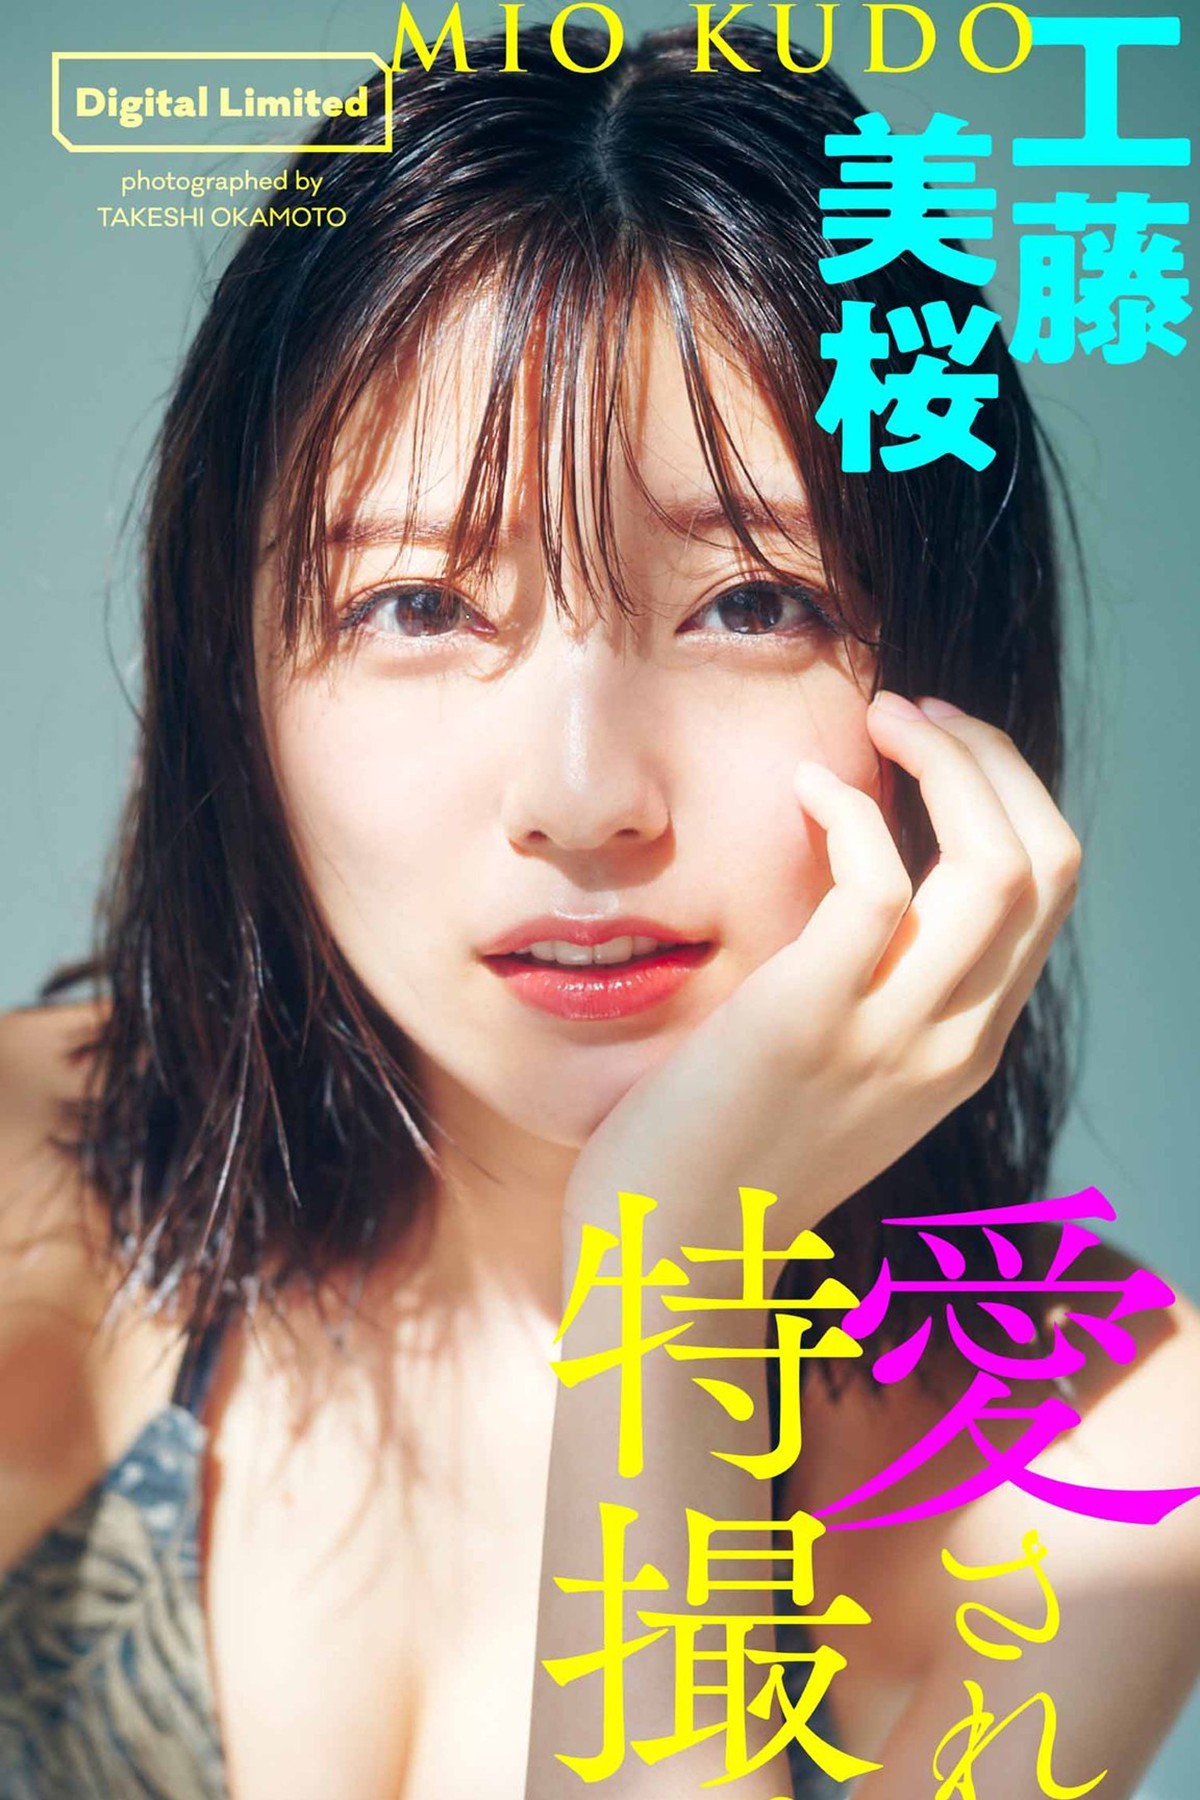 Digital Limited Mio Kudo 工藤美桜 – Be Loved Special Effects